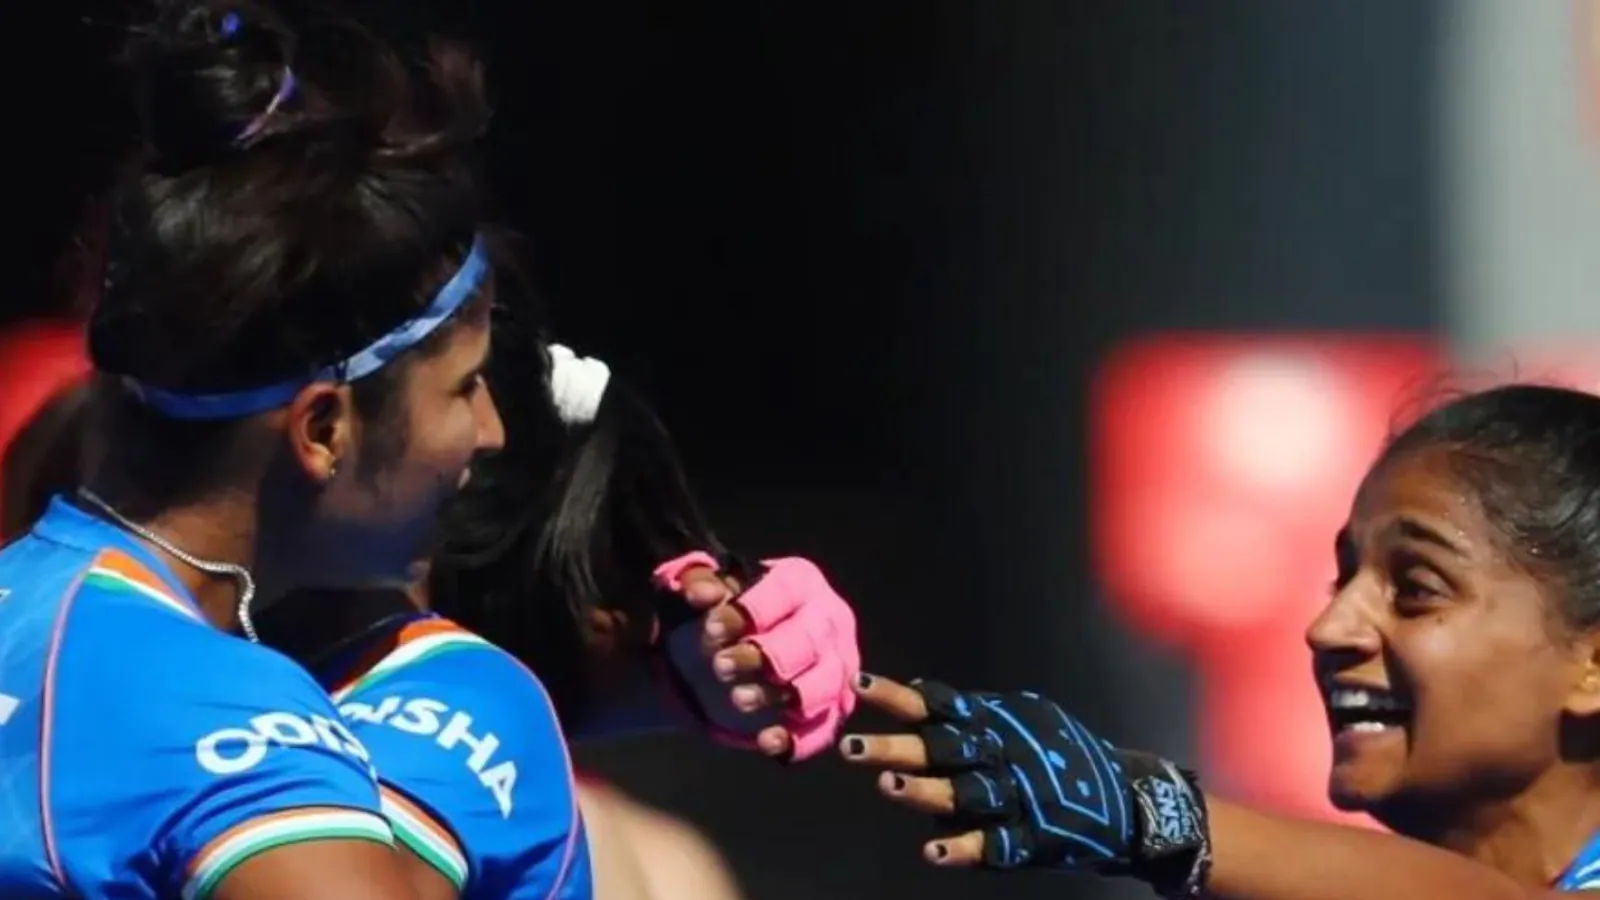 India Finish 9th at FIH Hockey Women’s World Cup 2022 after 3-1 Win over Japan